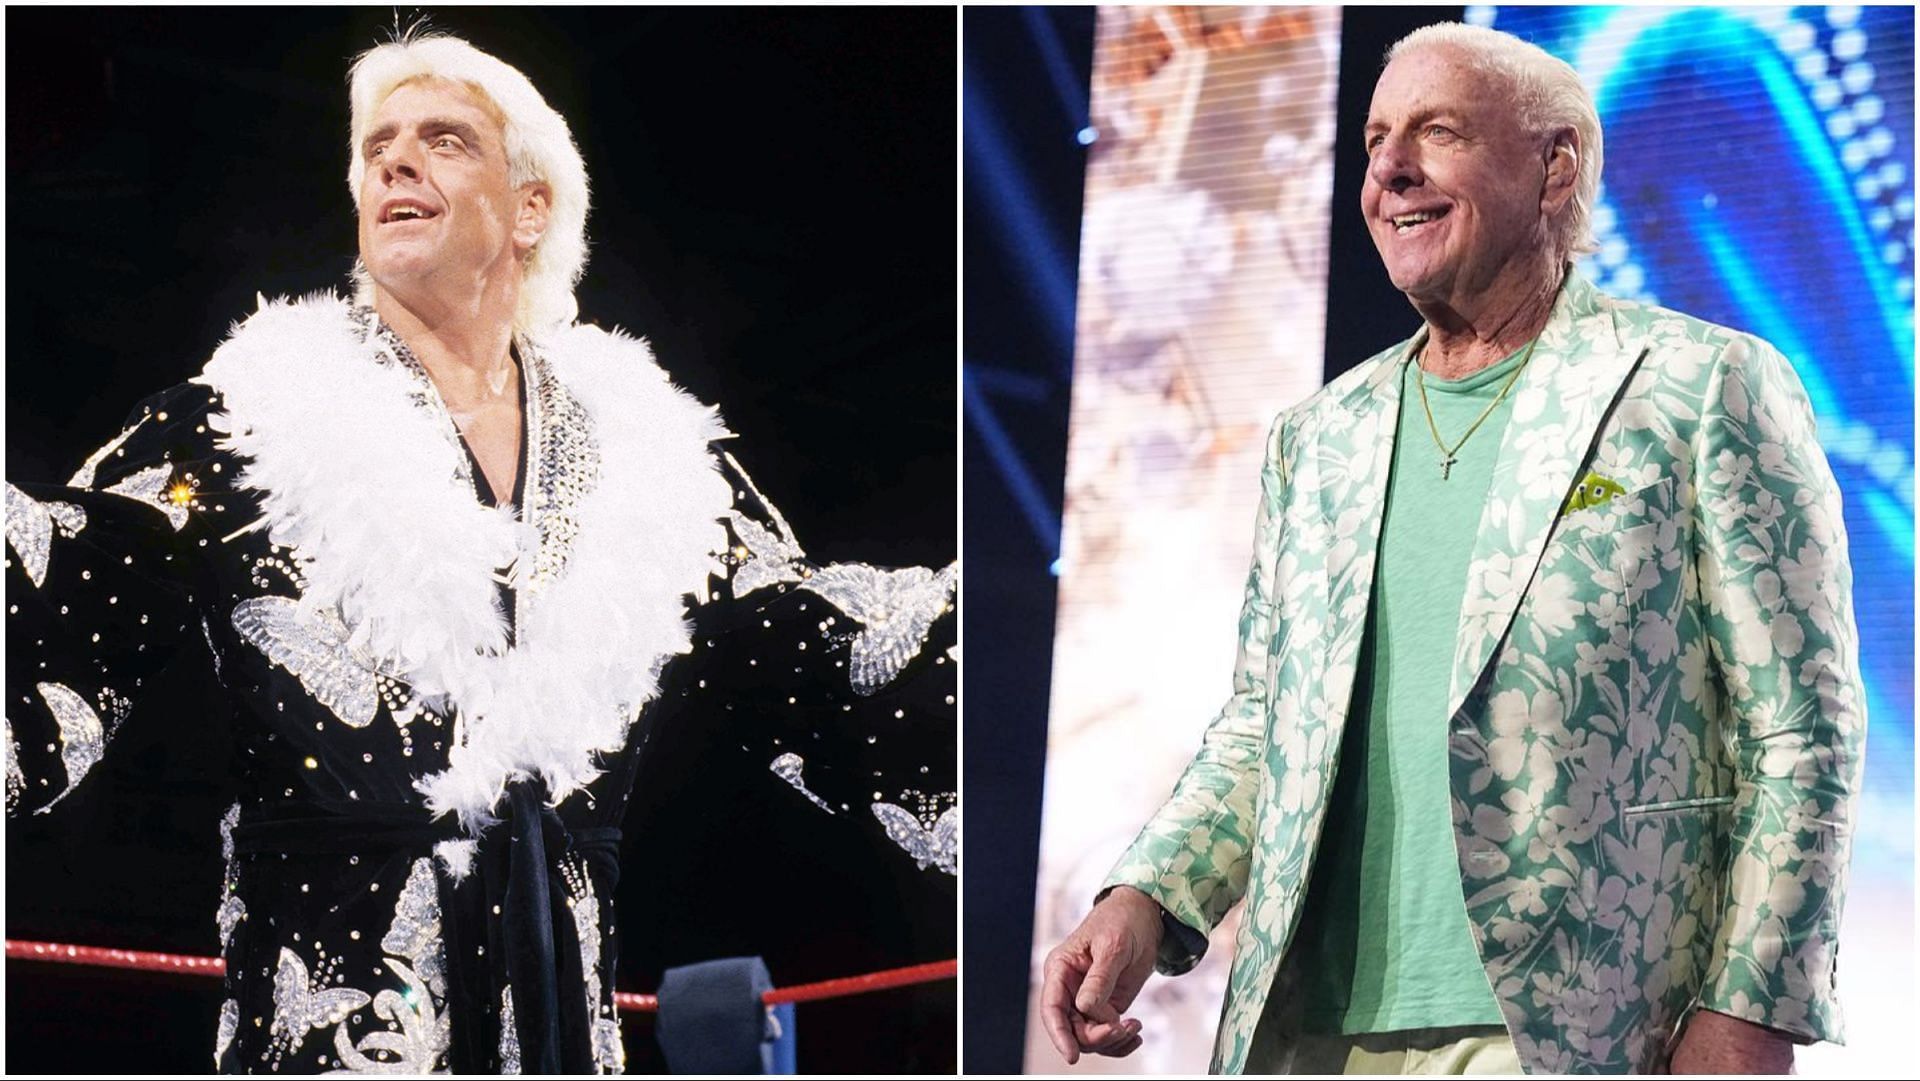 Ric Flair in the WWE ring, Flair heads to the ring on AEW Dynamite